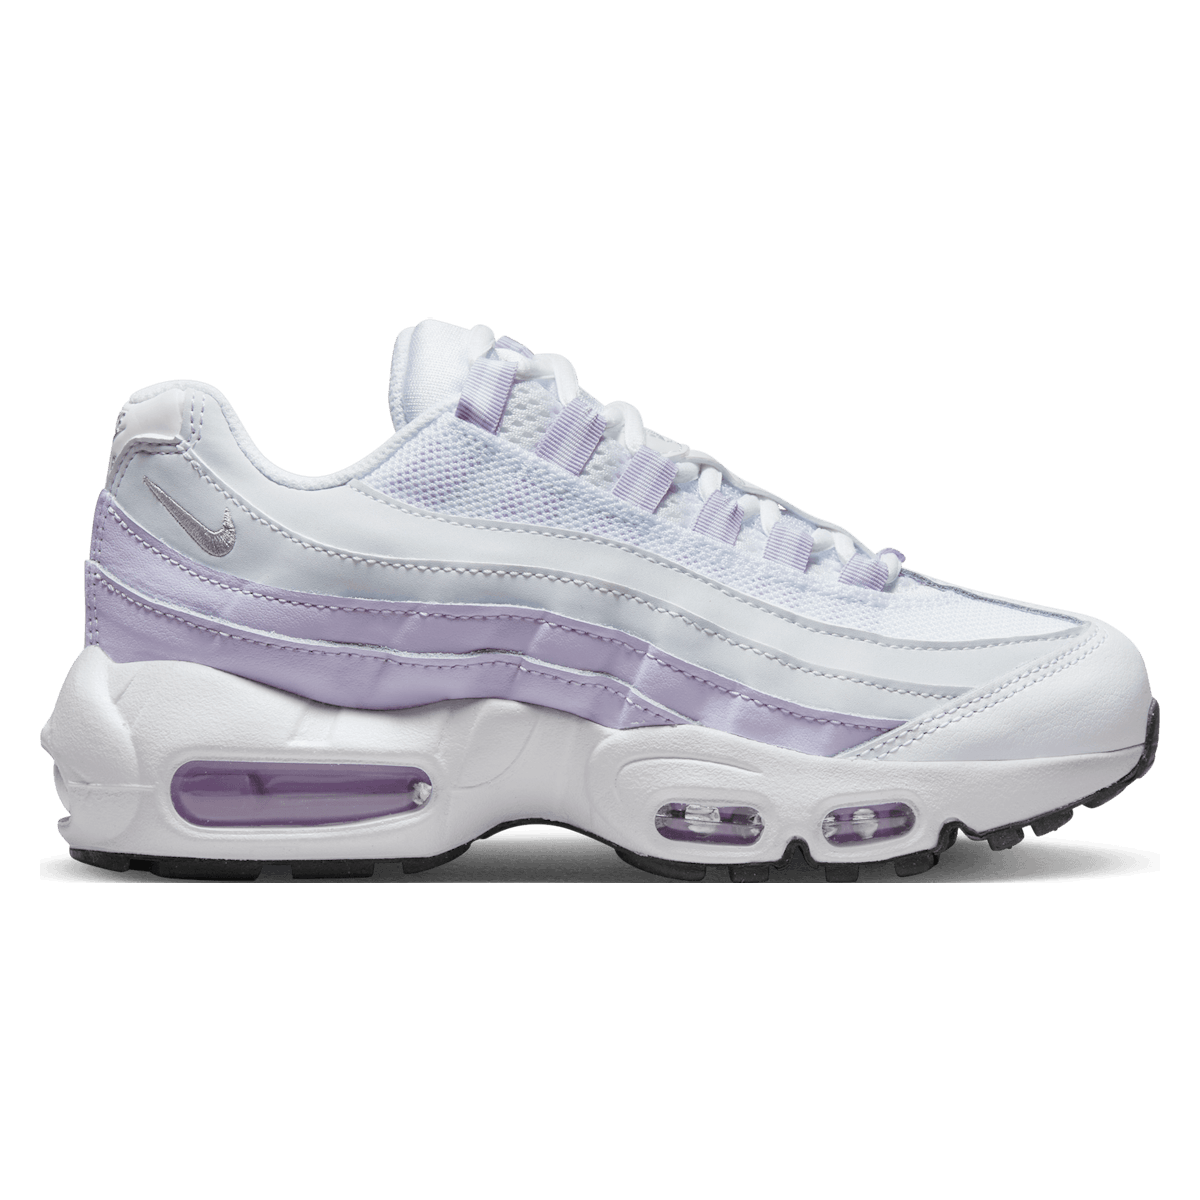 Nike Air Max 95 Recraft Whtie Violet Frost (GS)